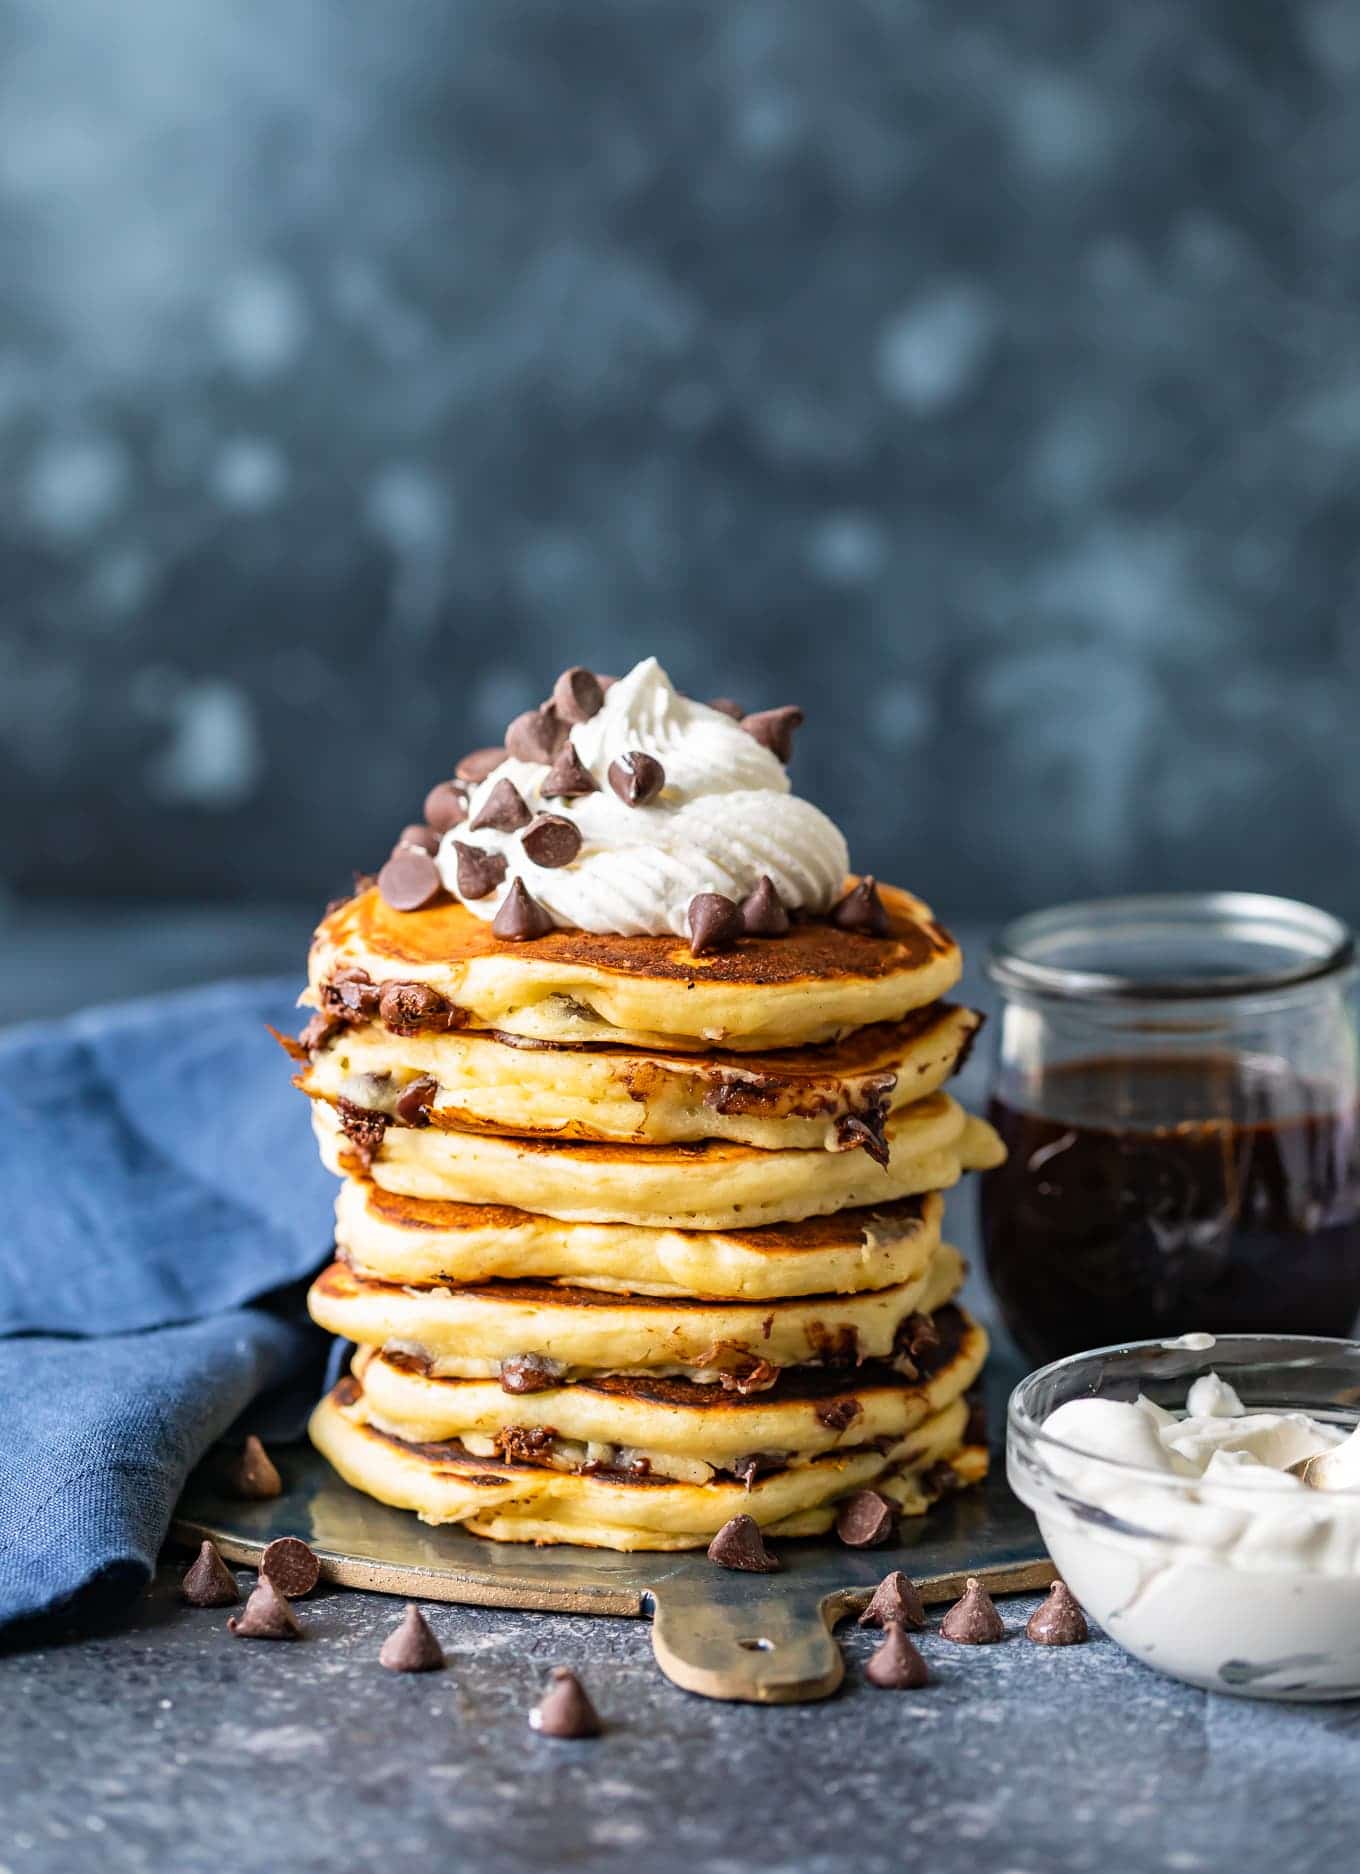 Chocolate chip pancakes topped with whipped cream and chocolate chips